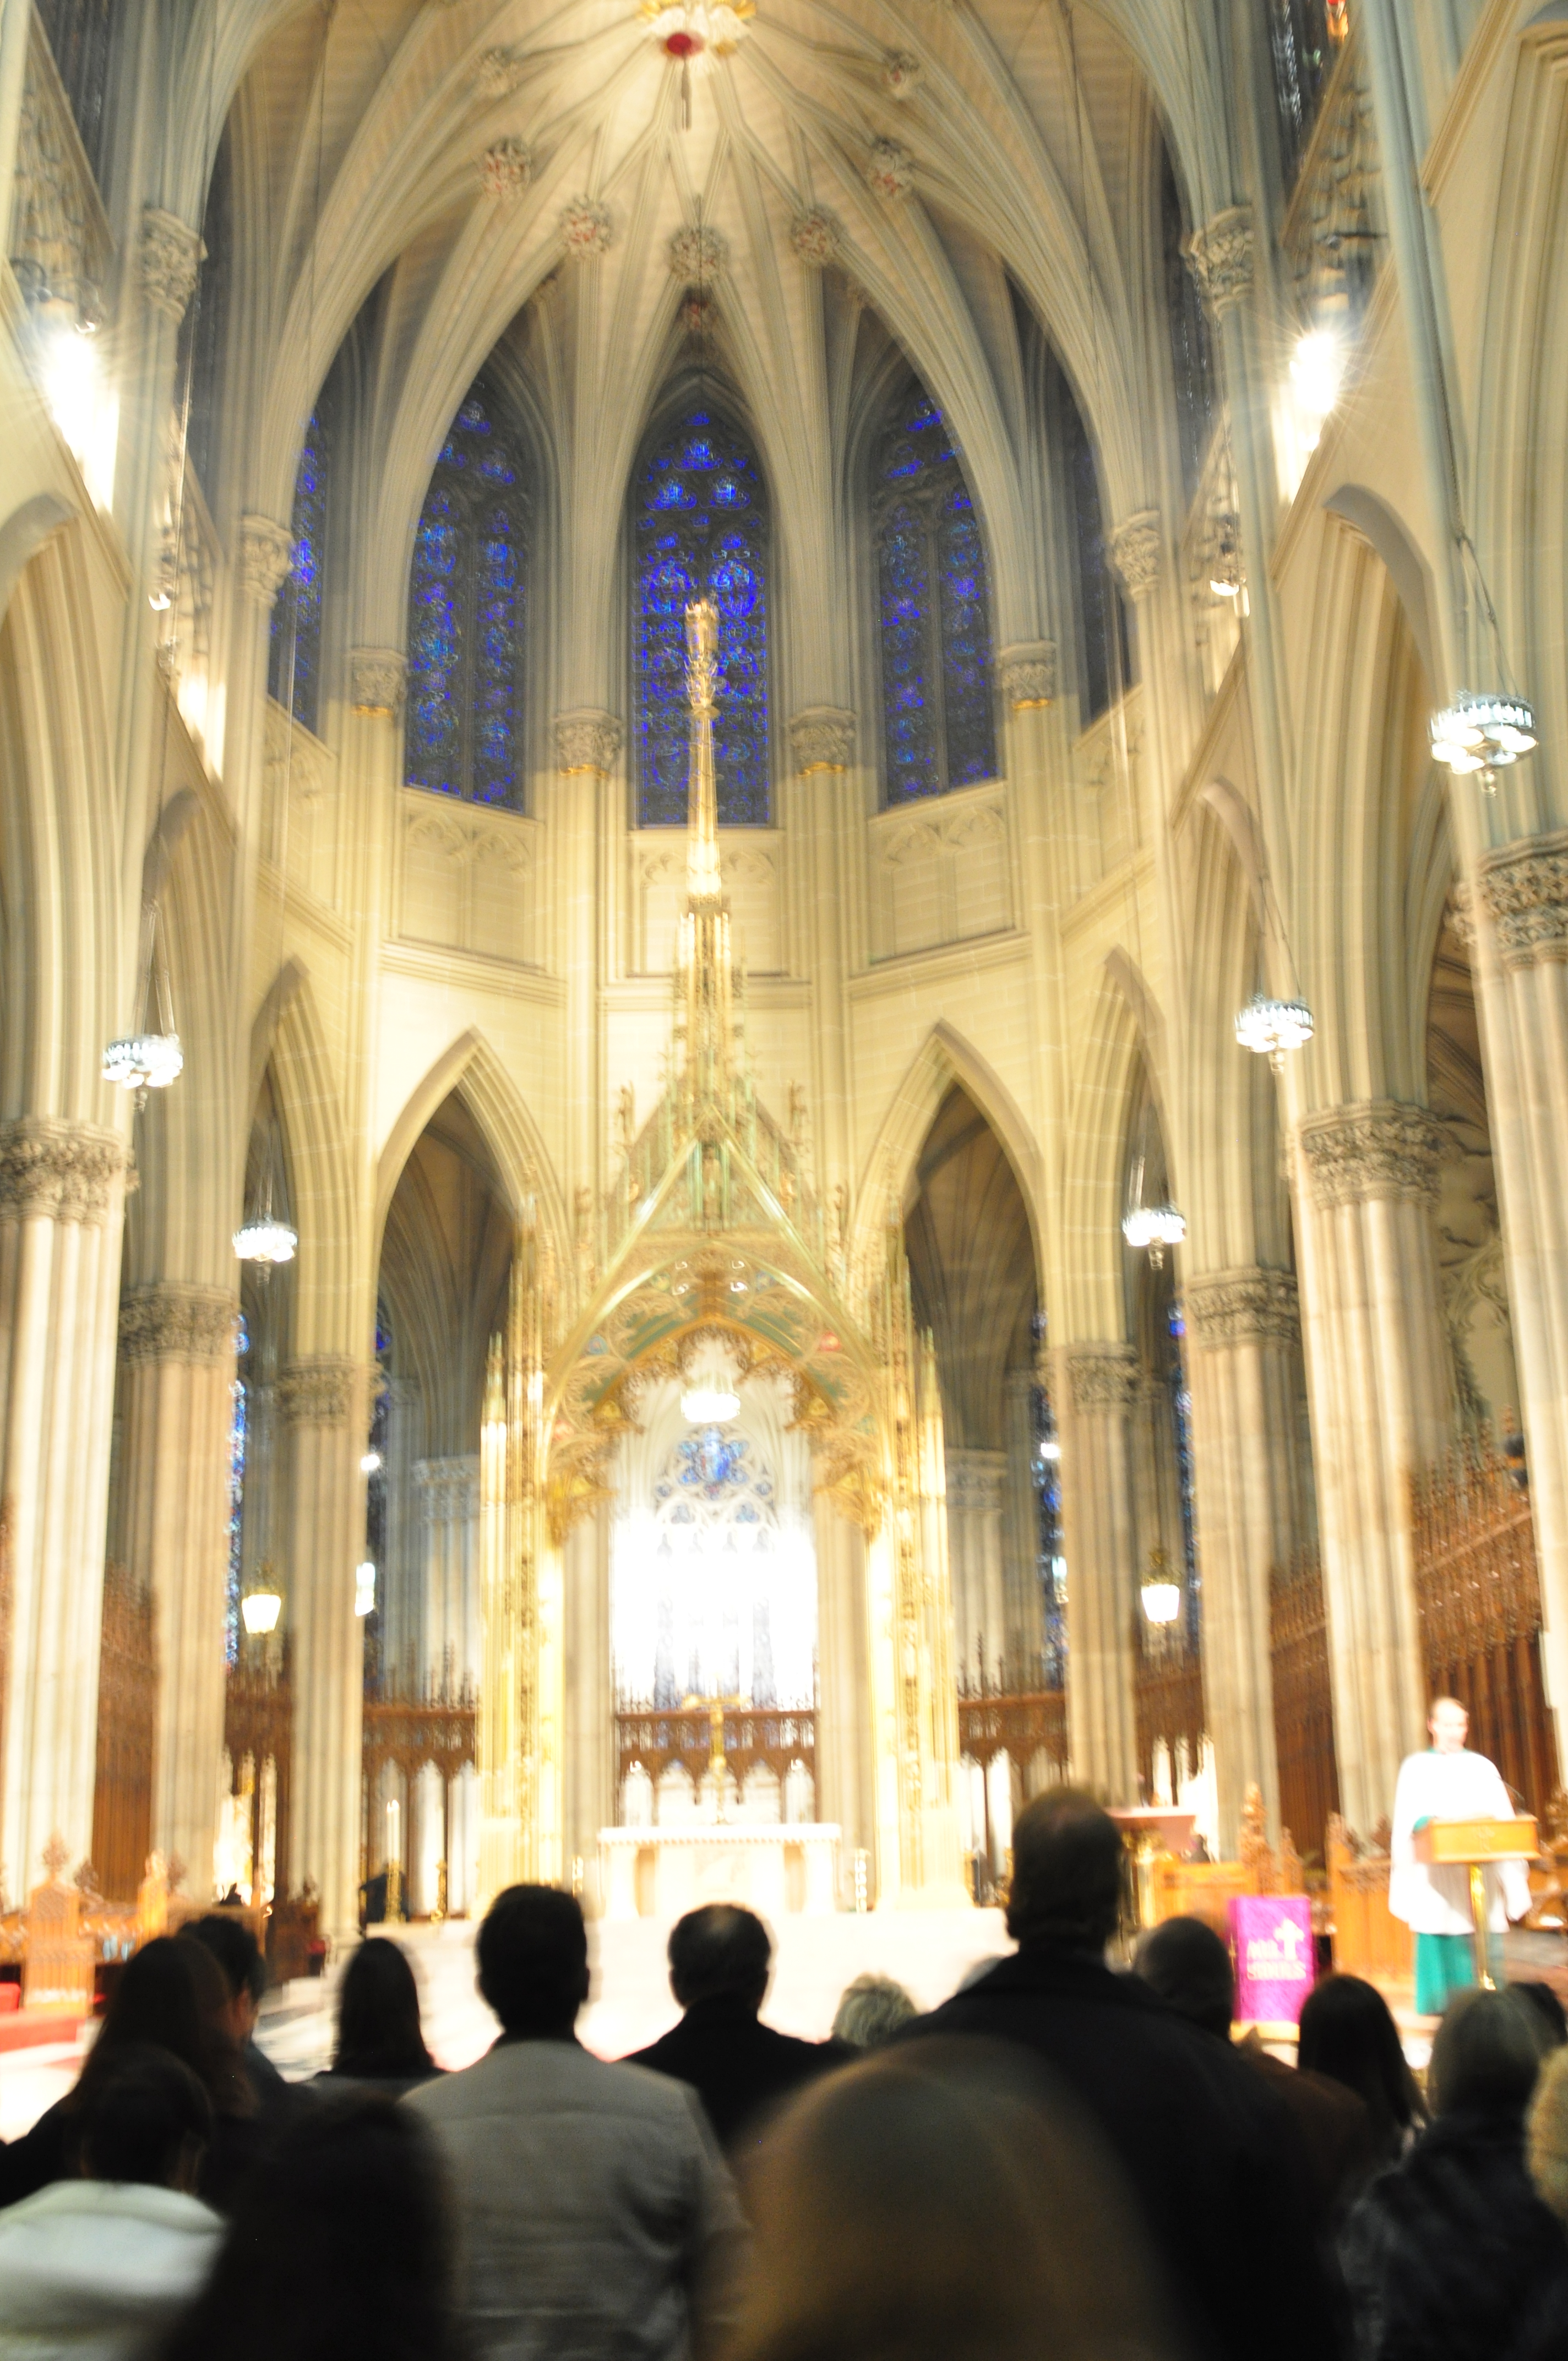 The inside of St. Patrick's Cathedral on 5th Avenue